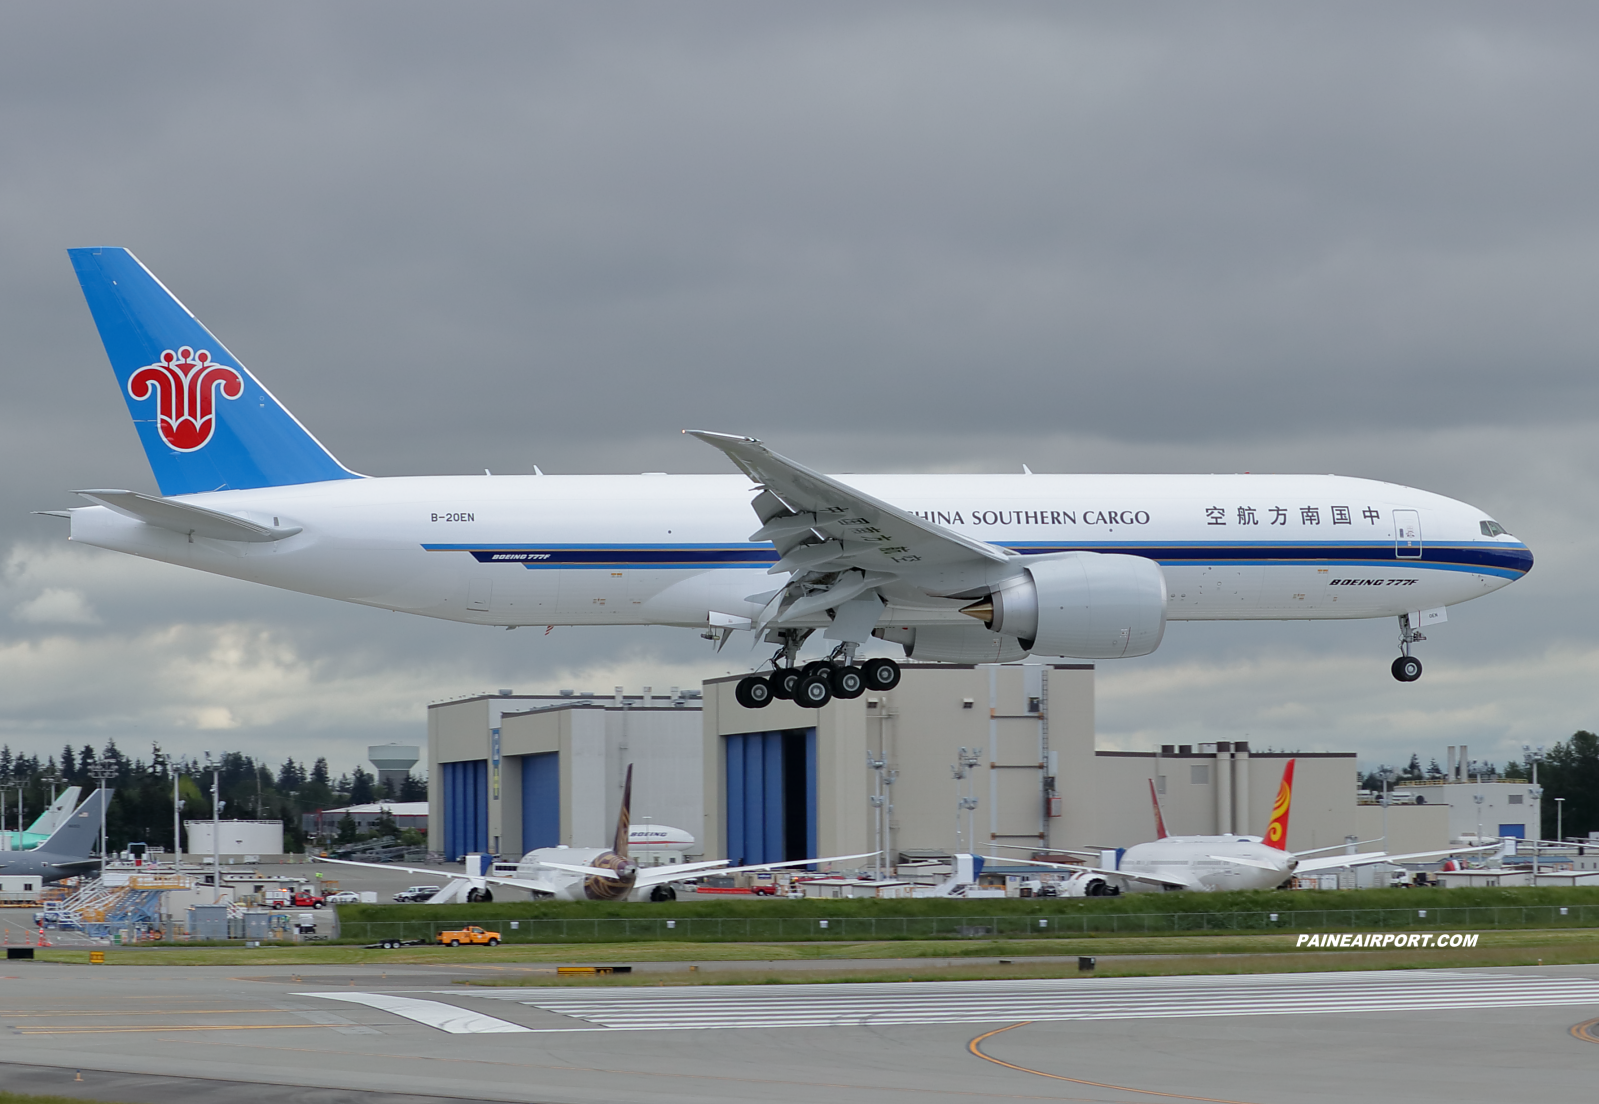 China Southern Cargo 777F B-20EN at Paine Field